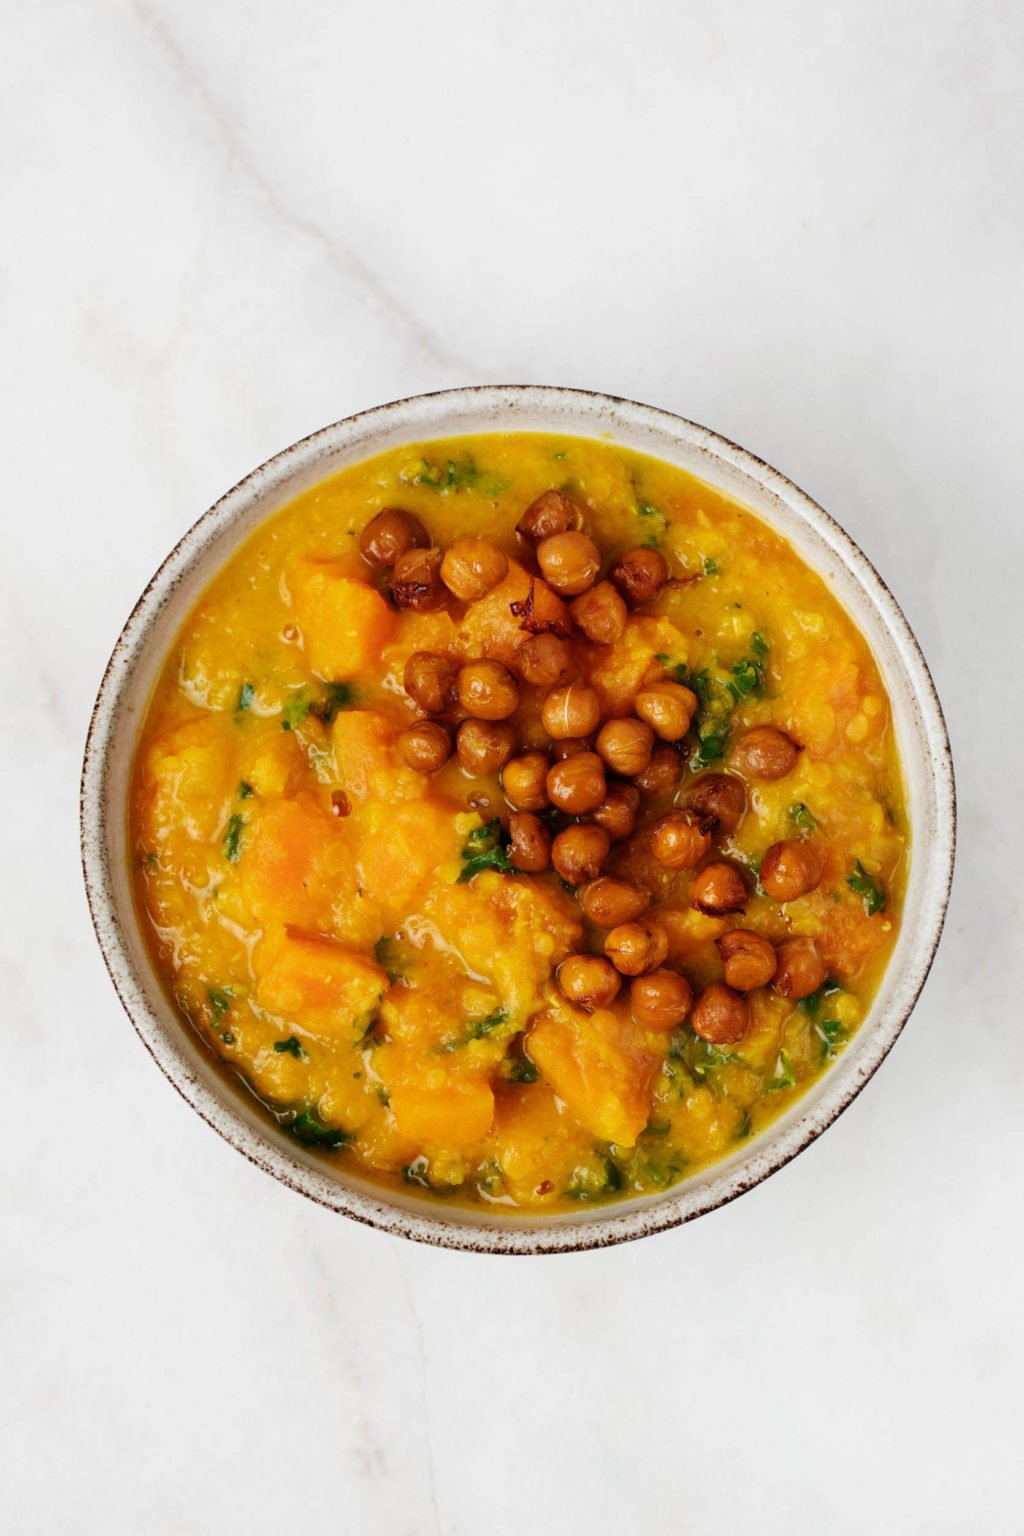 A bowl of red lentil butternut soup has been topped with crispy roasted chickpeas.